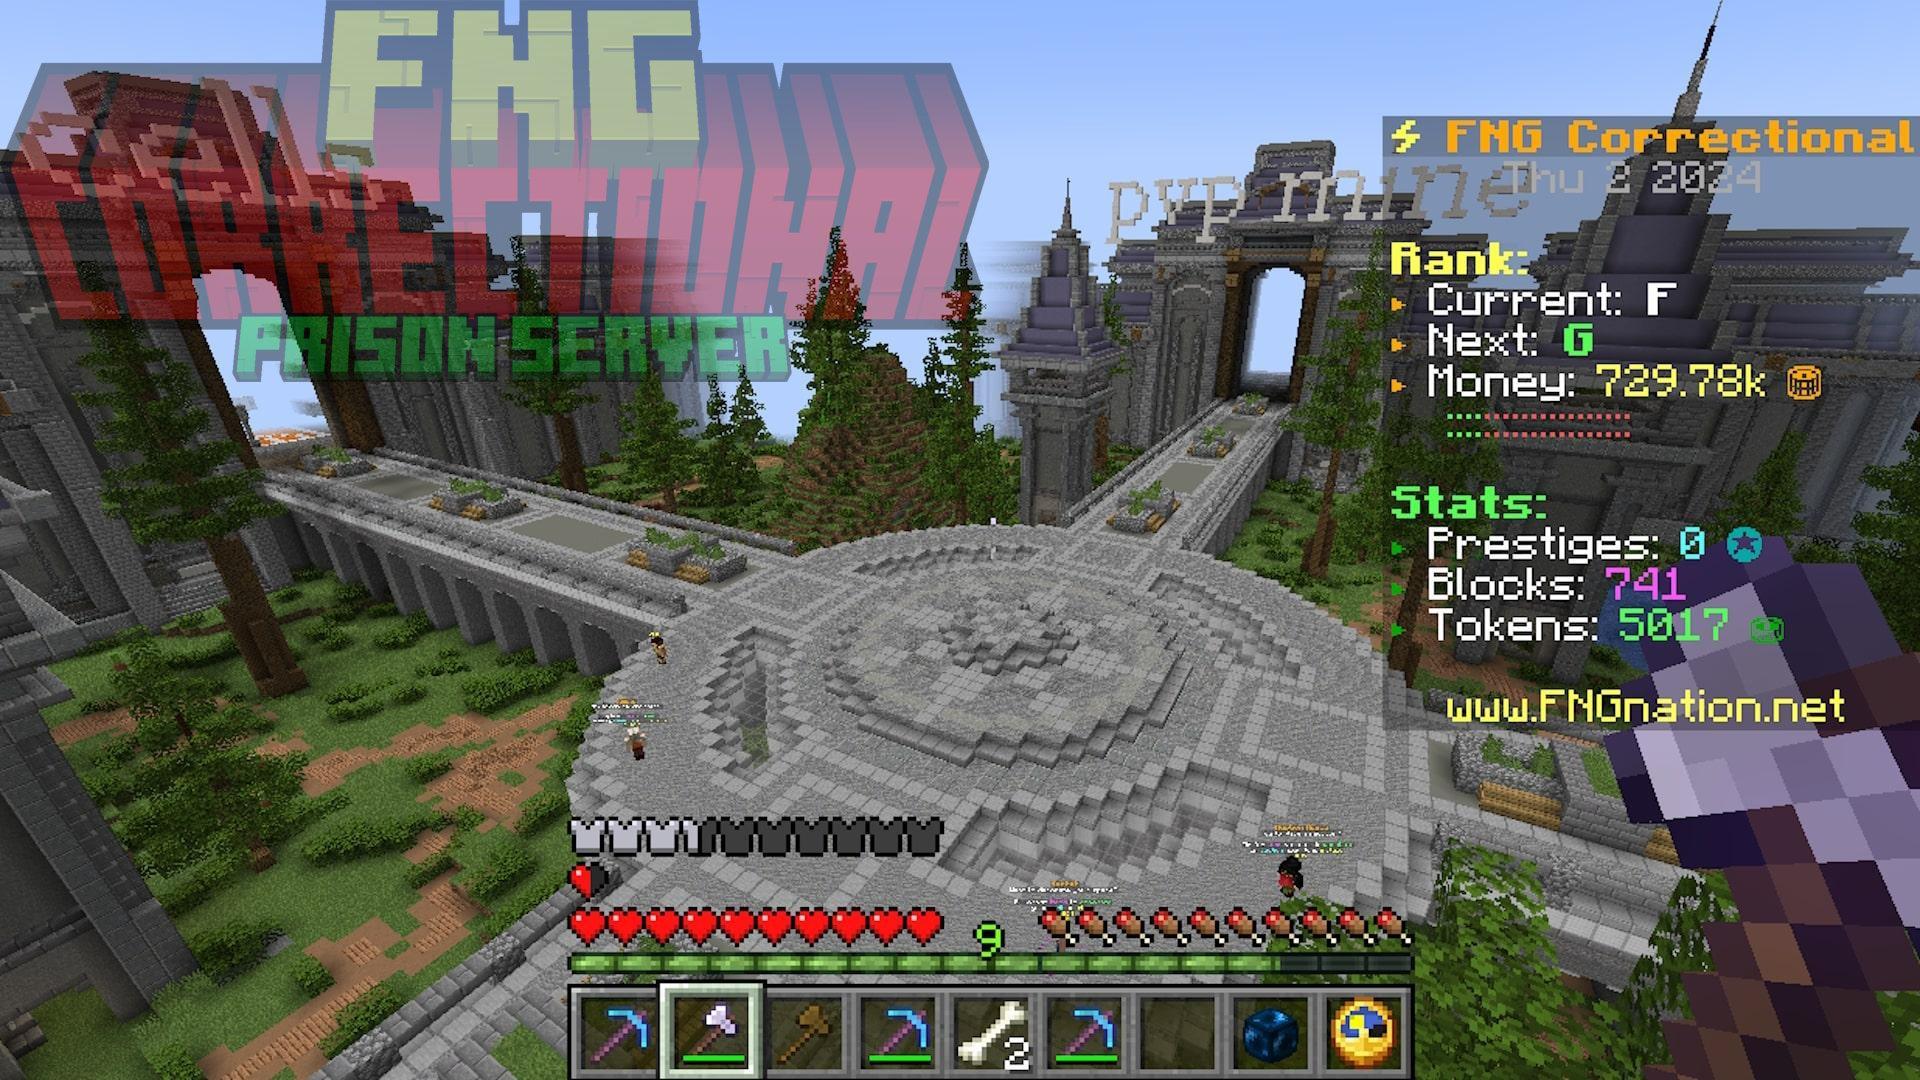 Screenshot from FNG Nation Network Minecraft Server